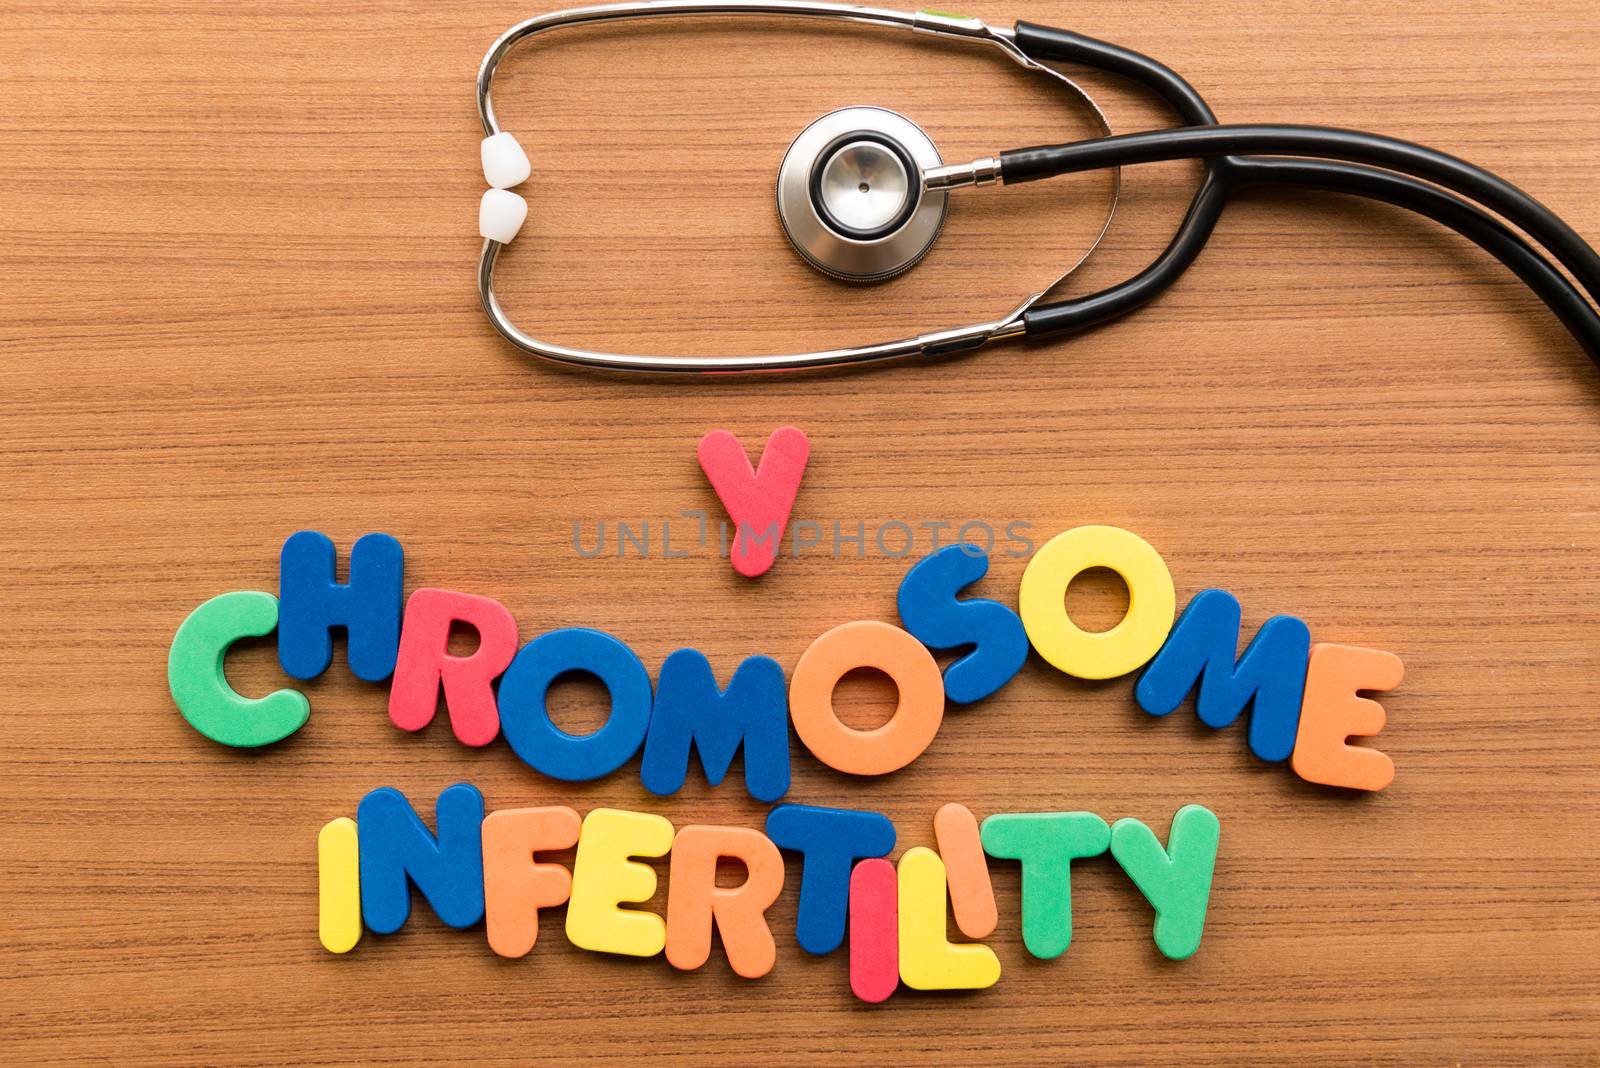 Y chromosome infertility colorful word with stethoscope on wooden background